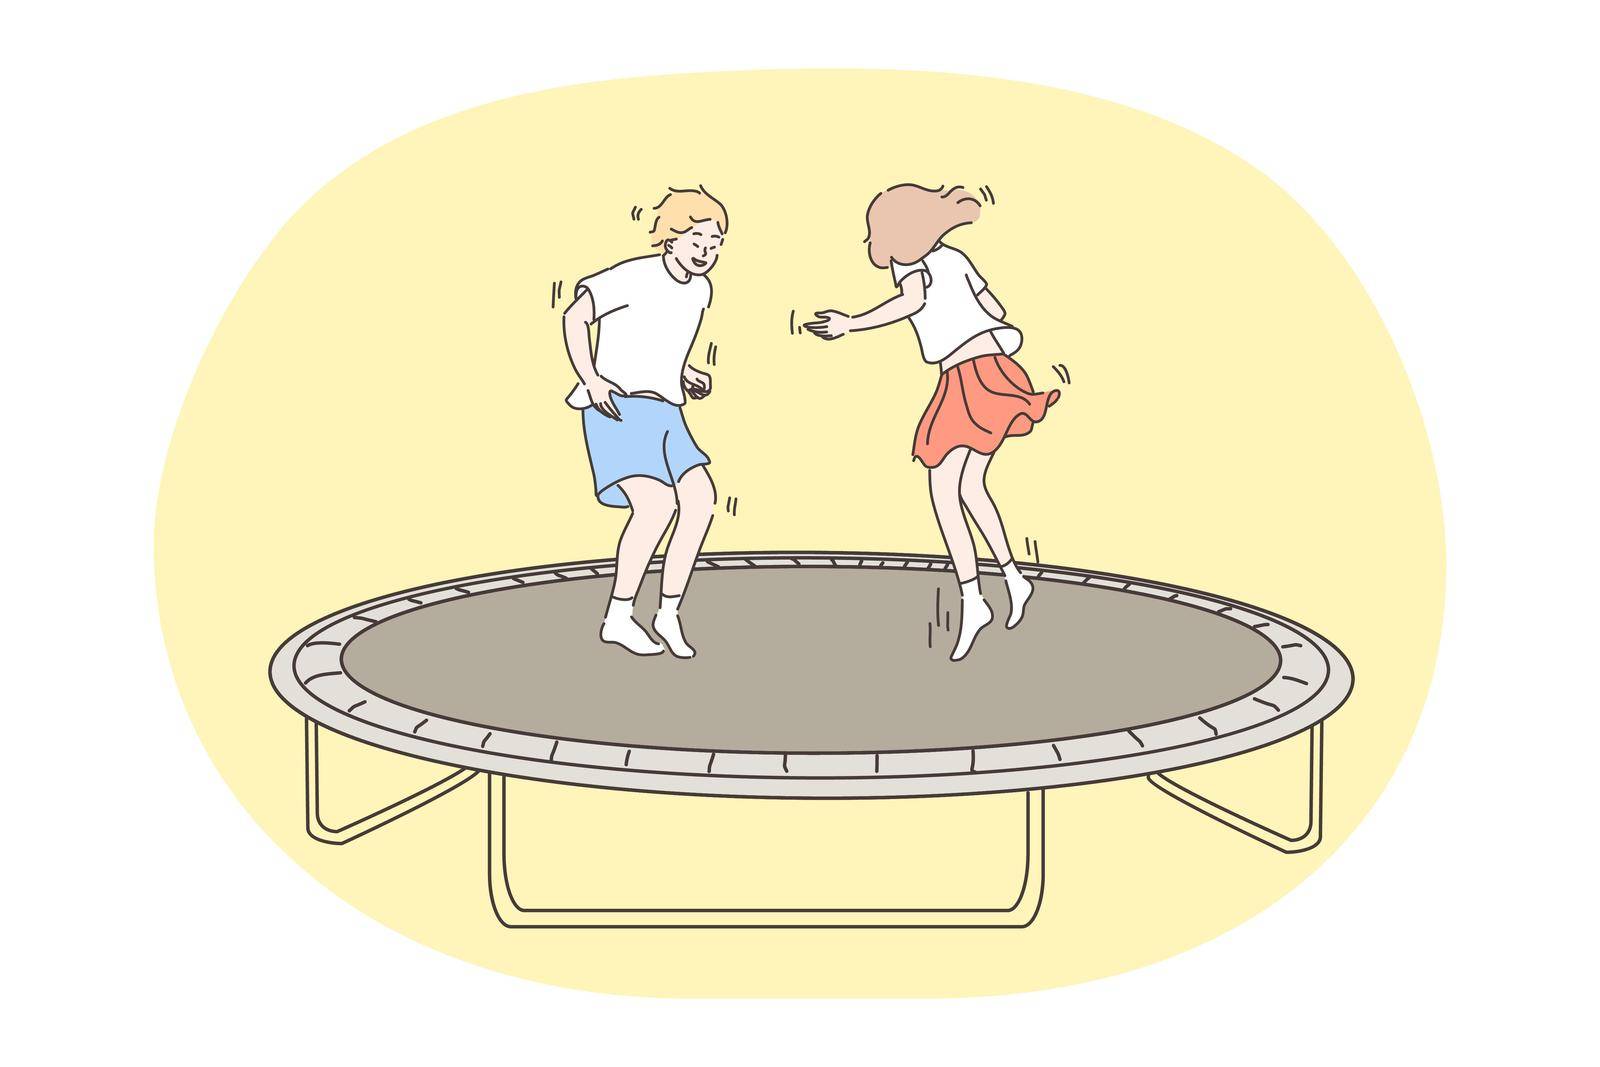 Jumping children, childhood, fun concept. Happy boy girl brother sister kids friends bouncing on trampoline on playground together. Summertime fun leisure activity at weekend holiday illustration.